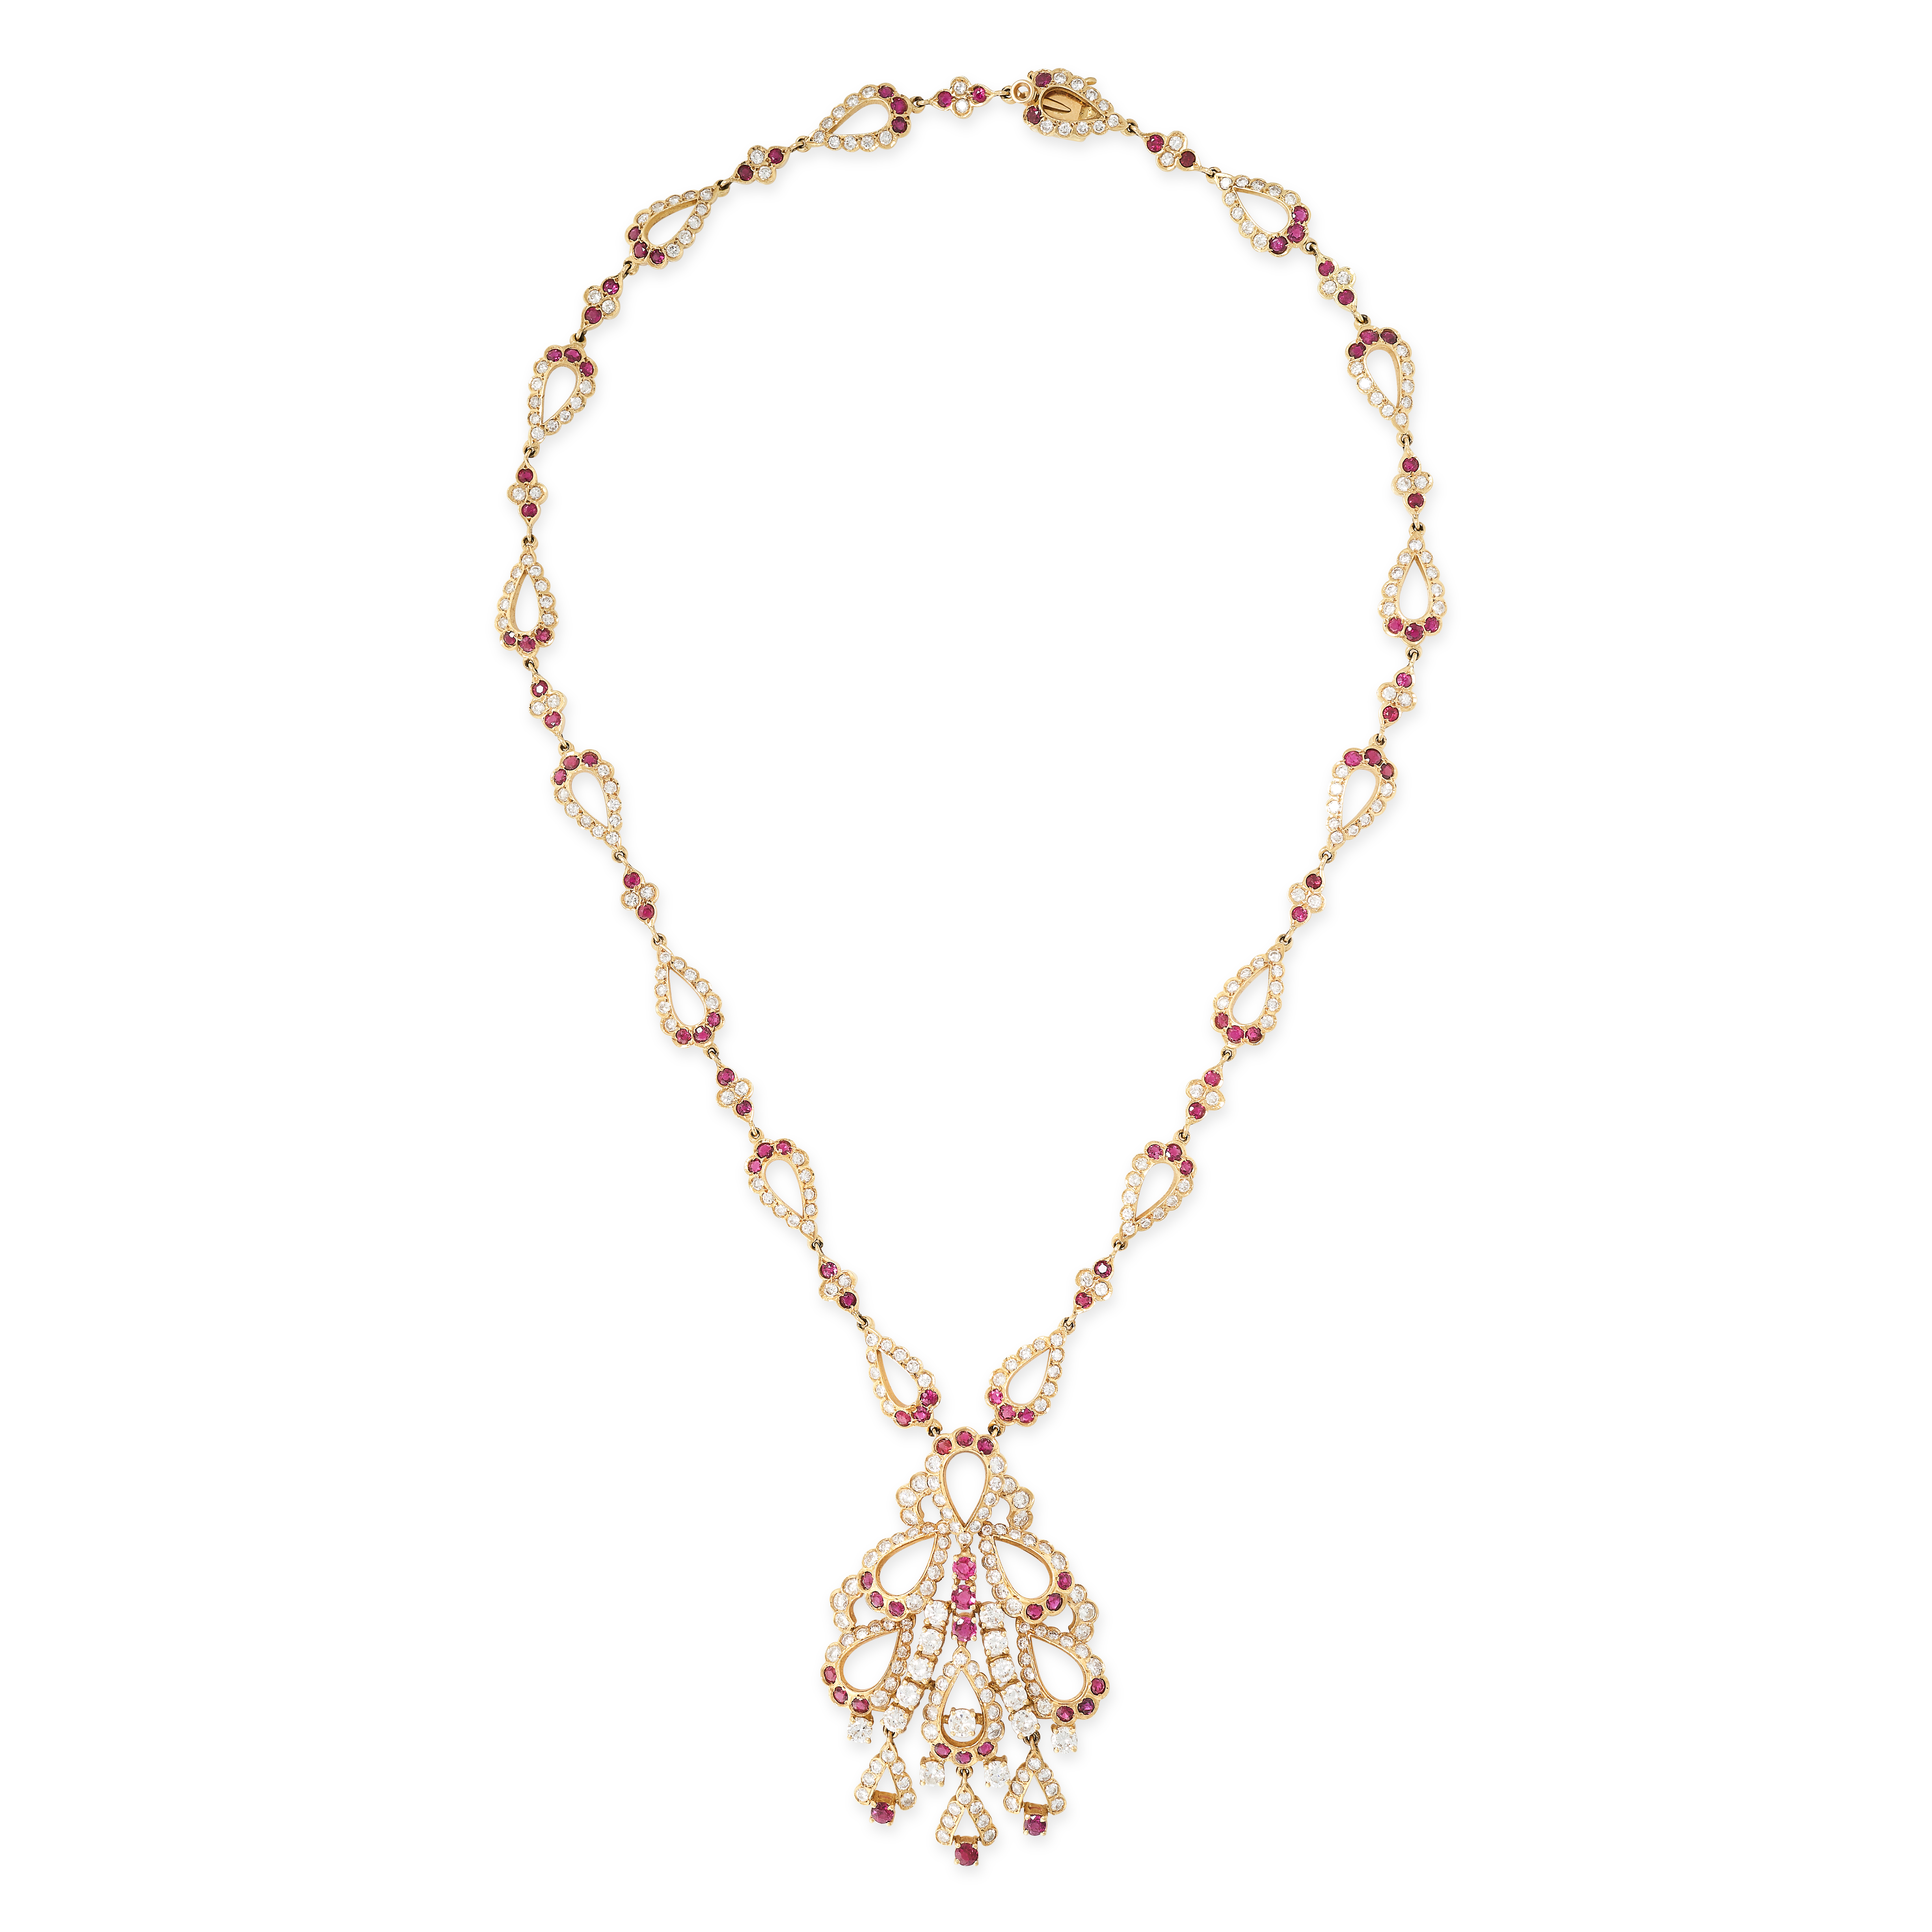 A RUBY AND DIAMOND NECKLACE in 18ct yellow gold, comprising a row of alternating quatrefoil and tear